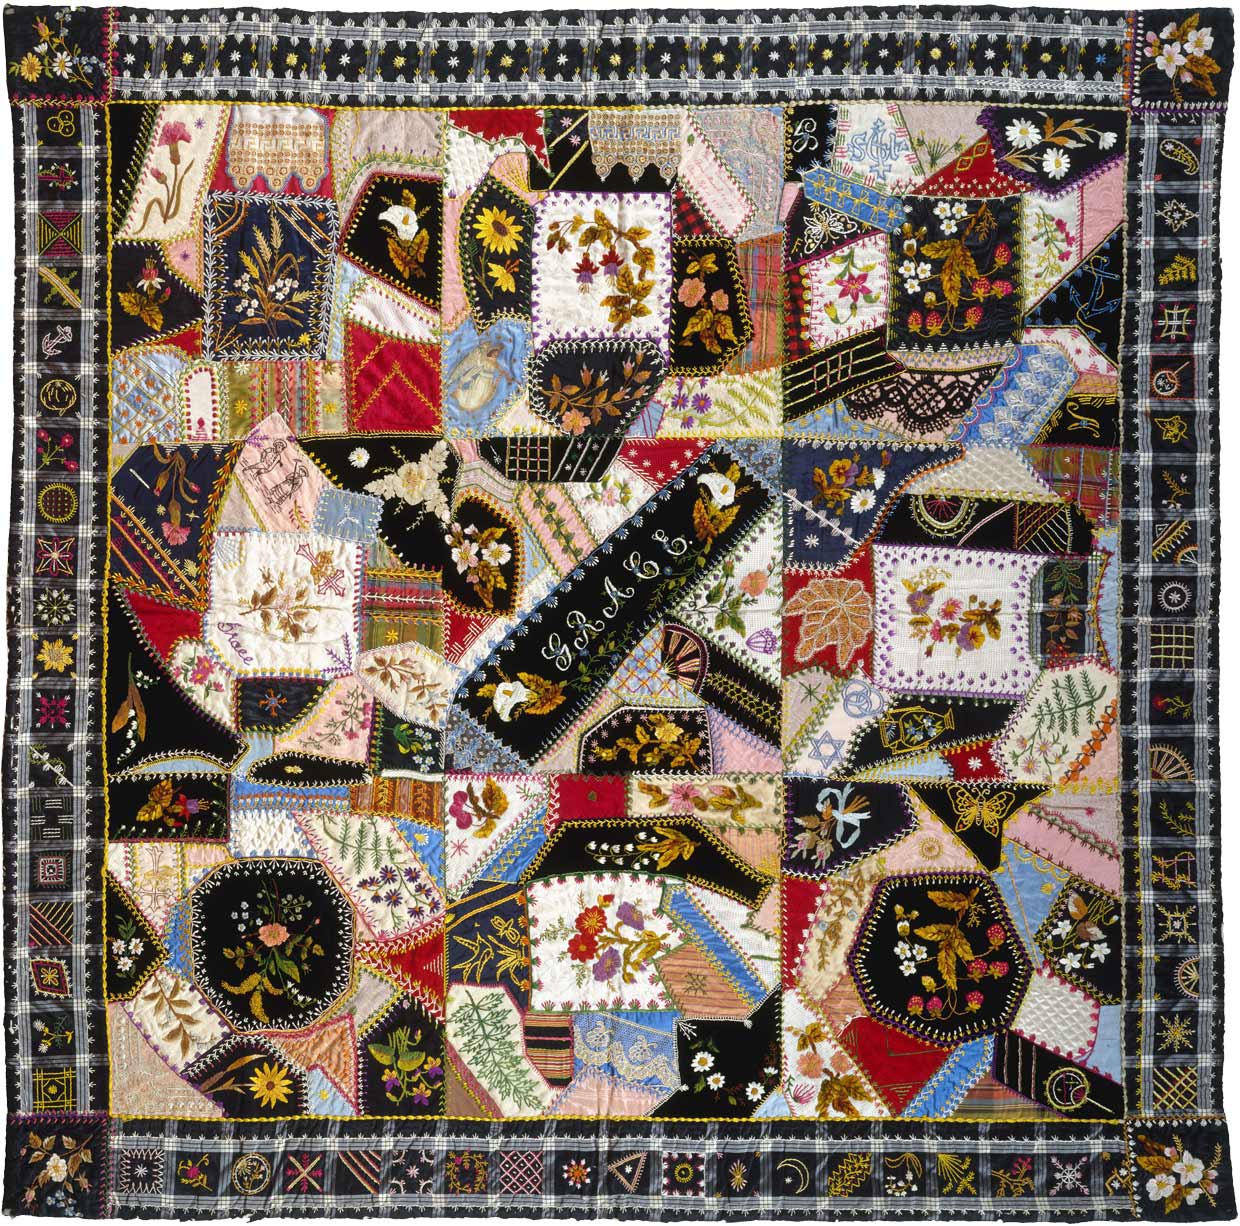 A crazy quilt full of hundreds of irregular-shaped patches stitched together with elaborate stitchings and embroidered with flowers and patterns. The word “GRACE” is embroidered in the middle.